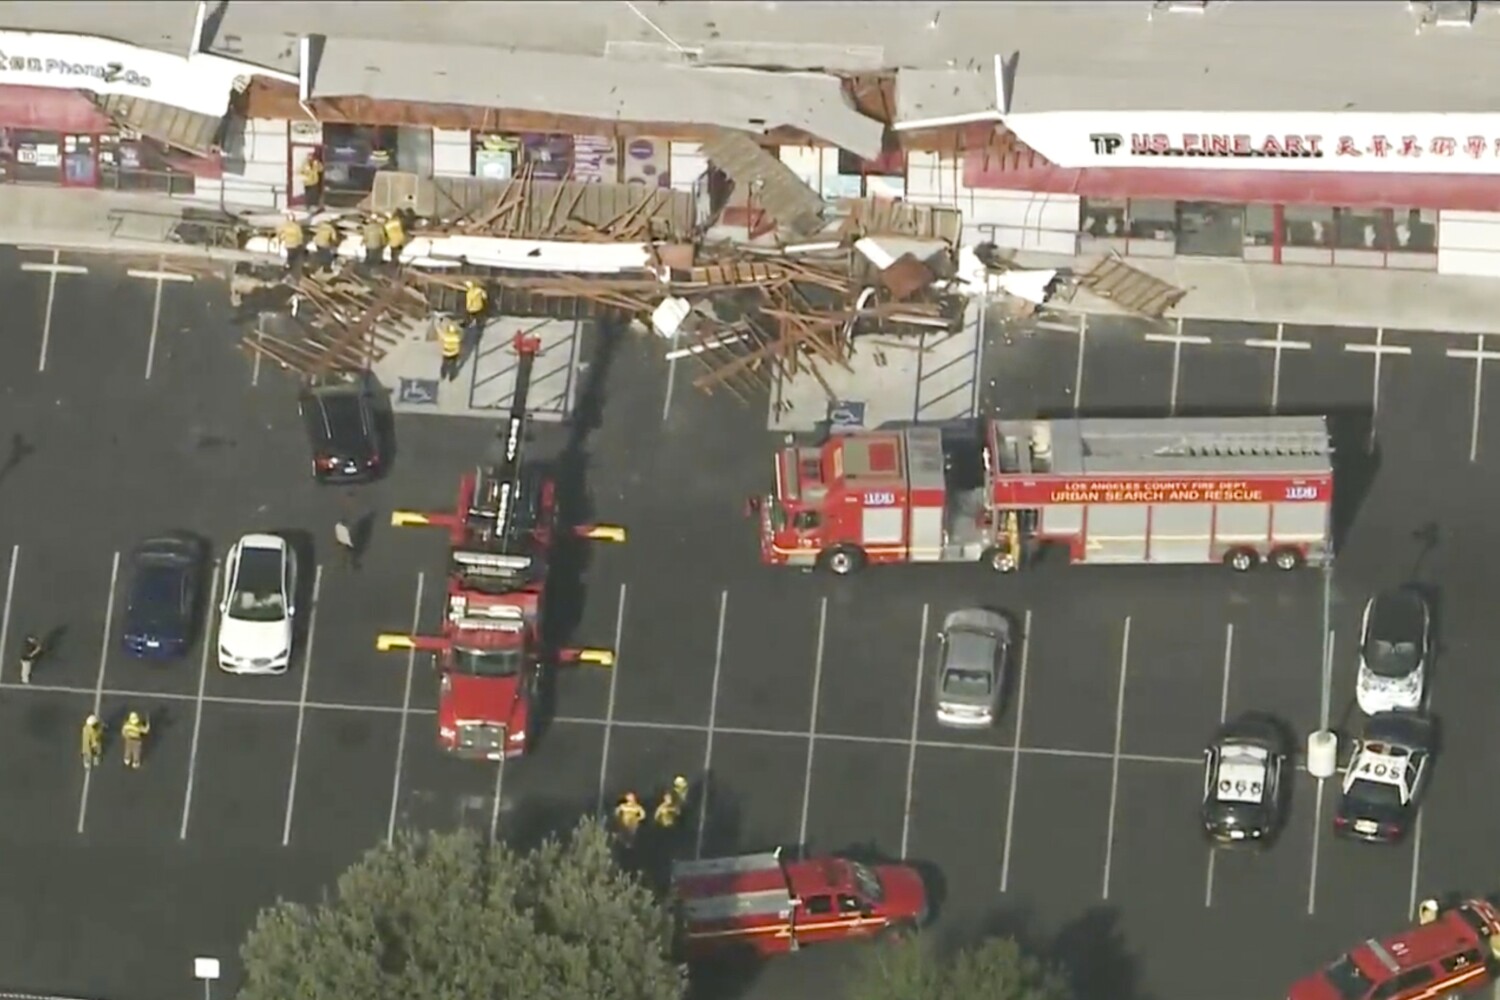 Firefighters free 6 people trapped in Temple City strip mall after facade collapses